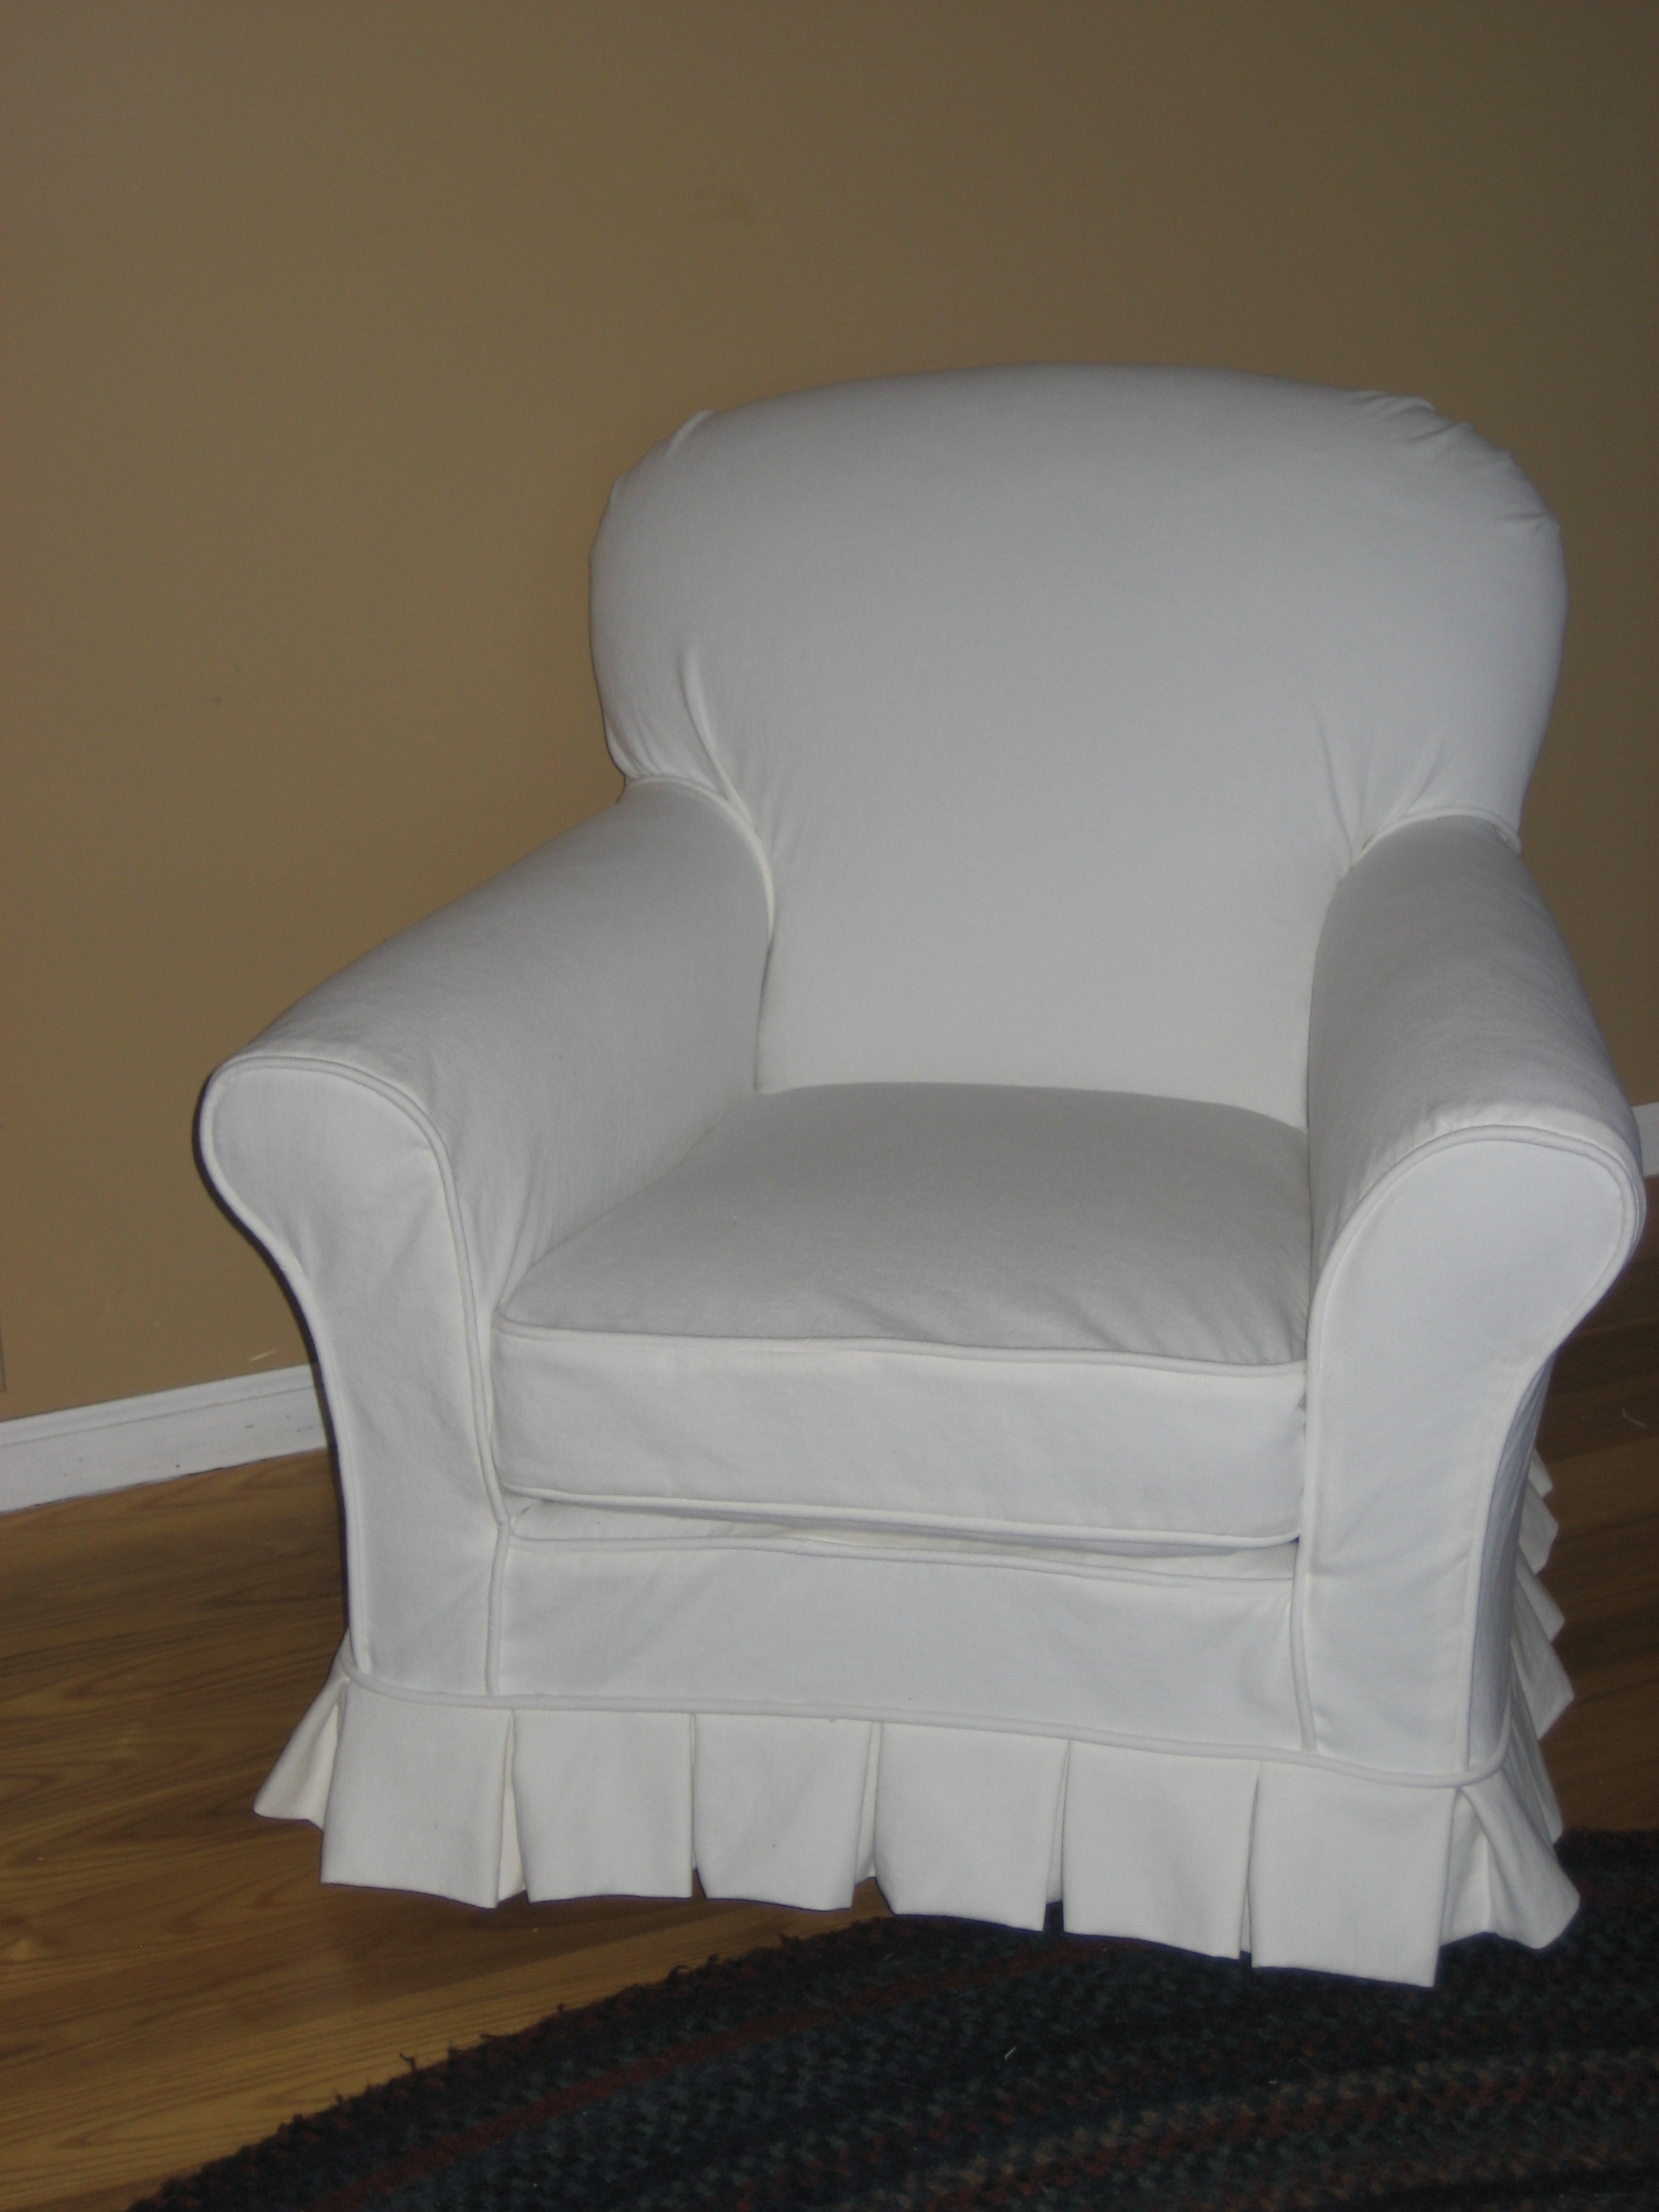 Learn To Sew Your Own Diy Slipcover Kim S Upholstery